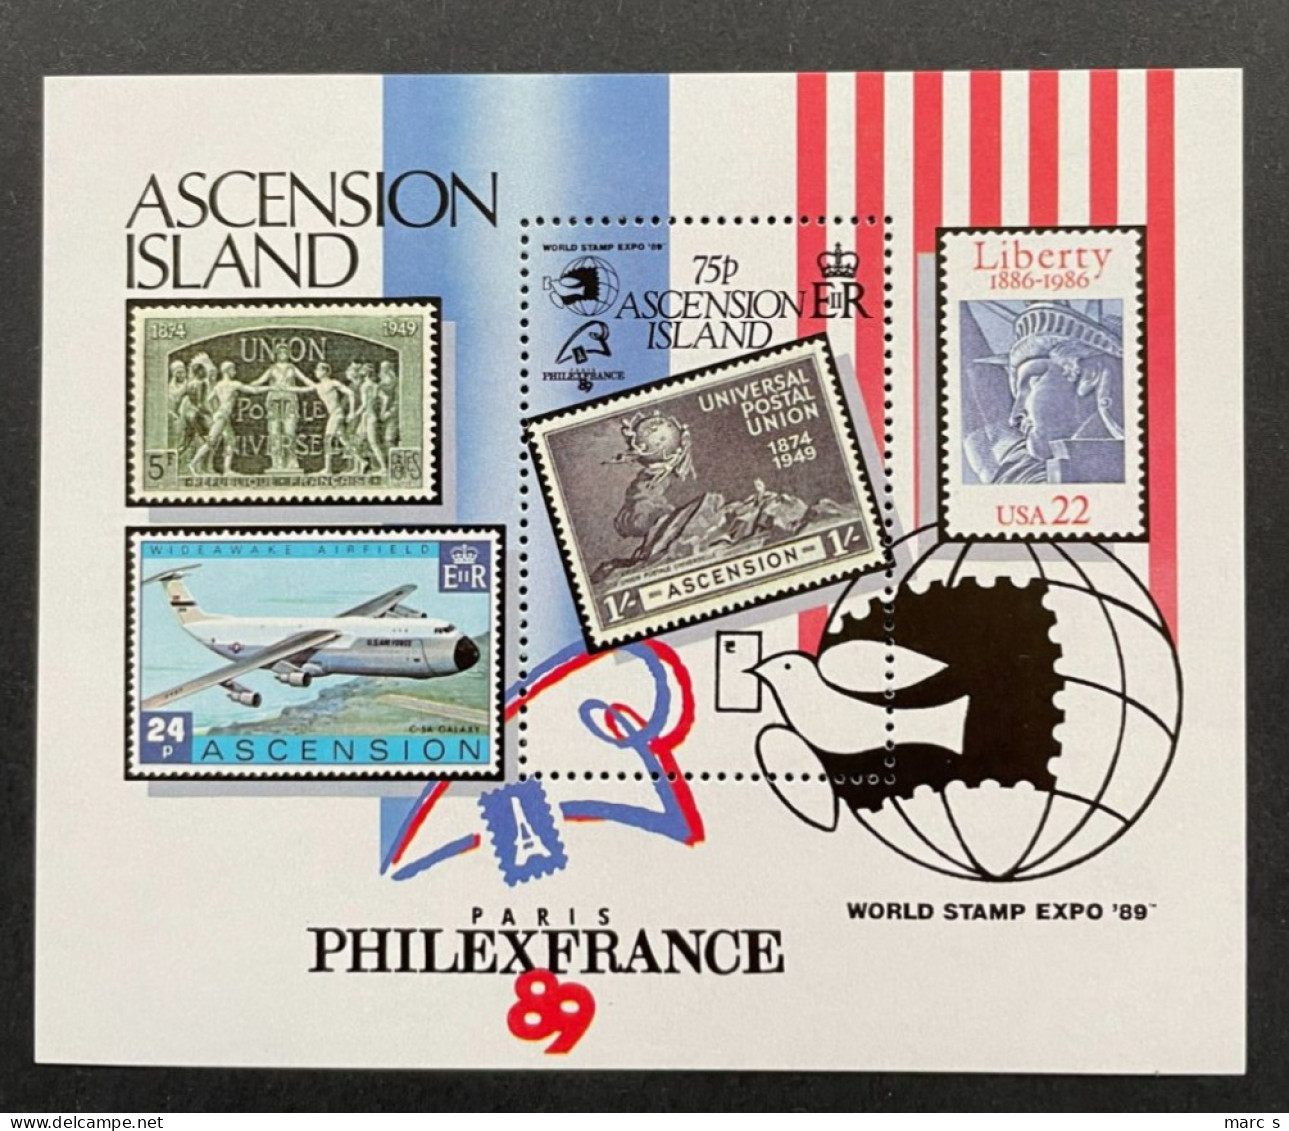 ASCENSION 1989 - NEUF**/MNH - LUXE - SHEET BLOC Mi BL 19 - YT BF 20 - PHILEXFRANCE - Ascension